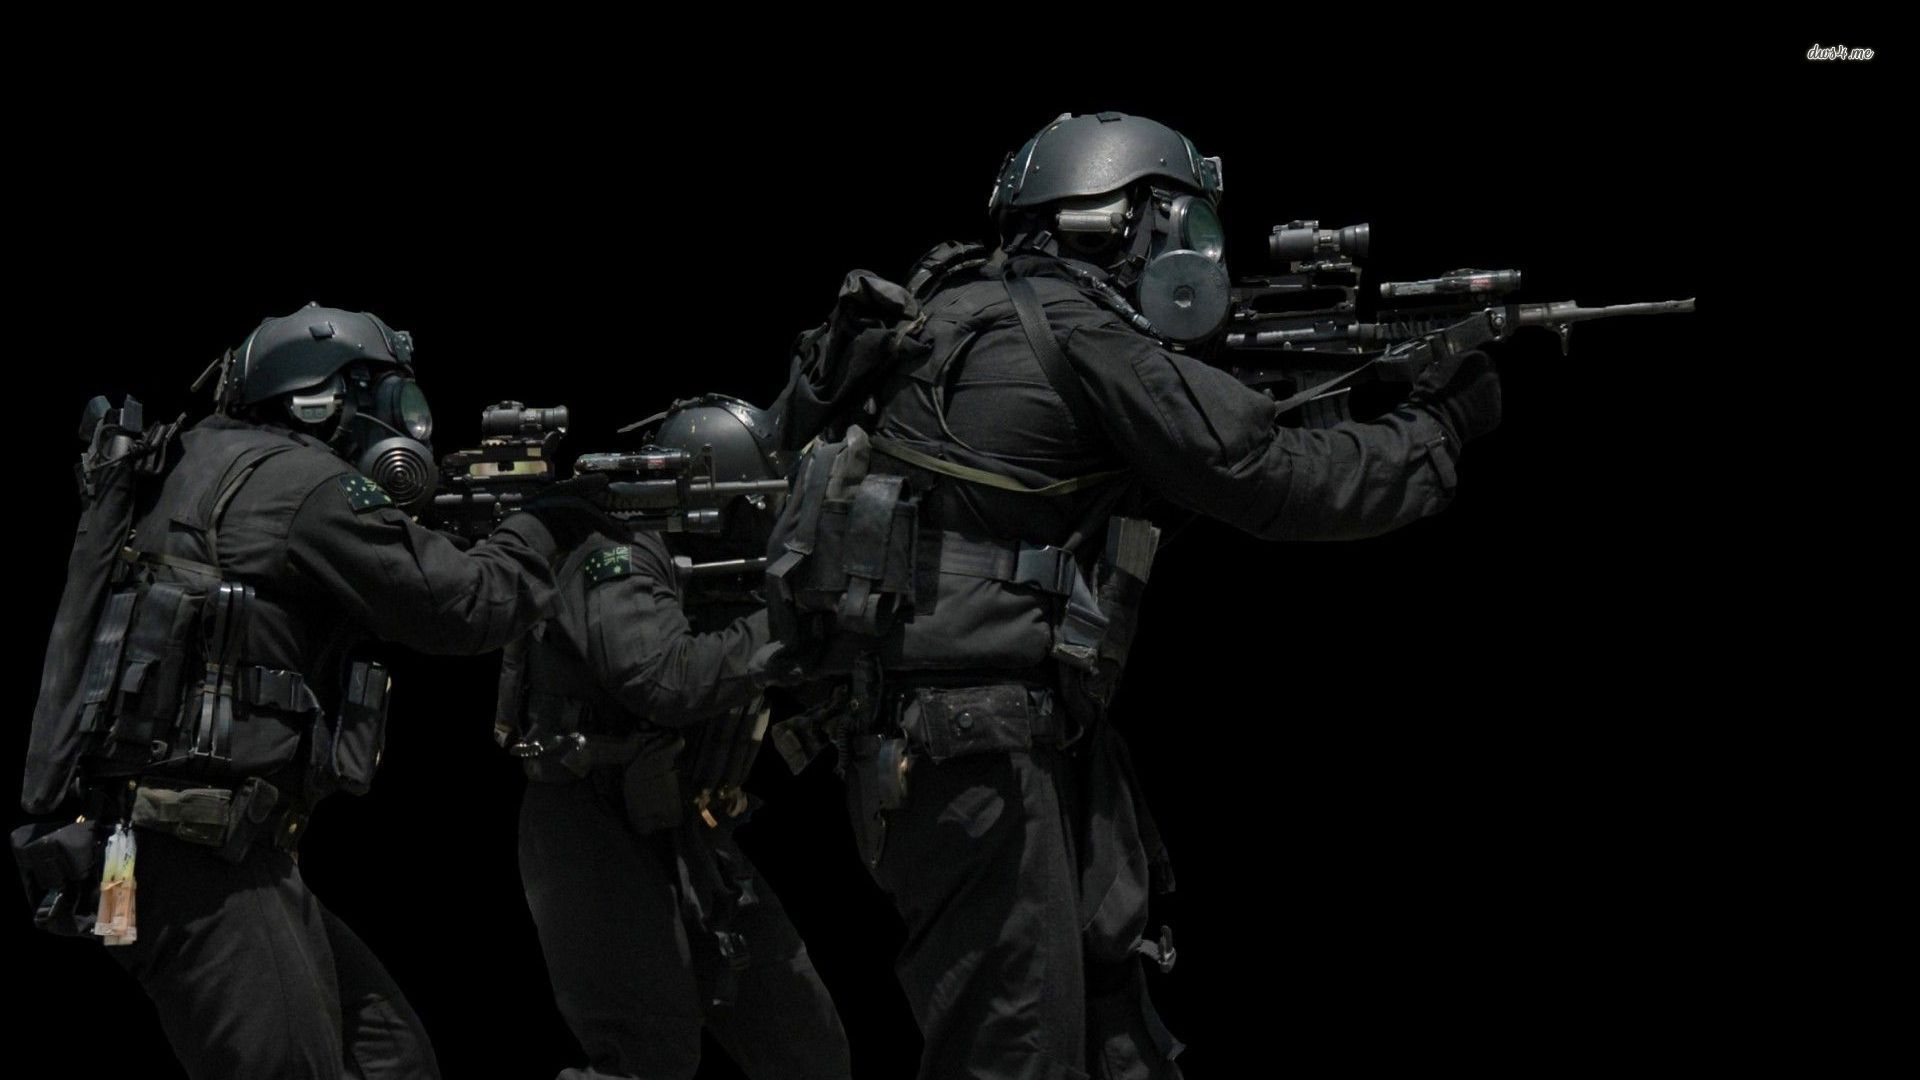 SWAT soldiers wallpaper - Photography wallpapers - #17490